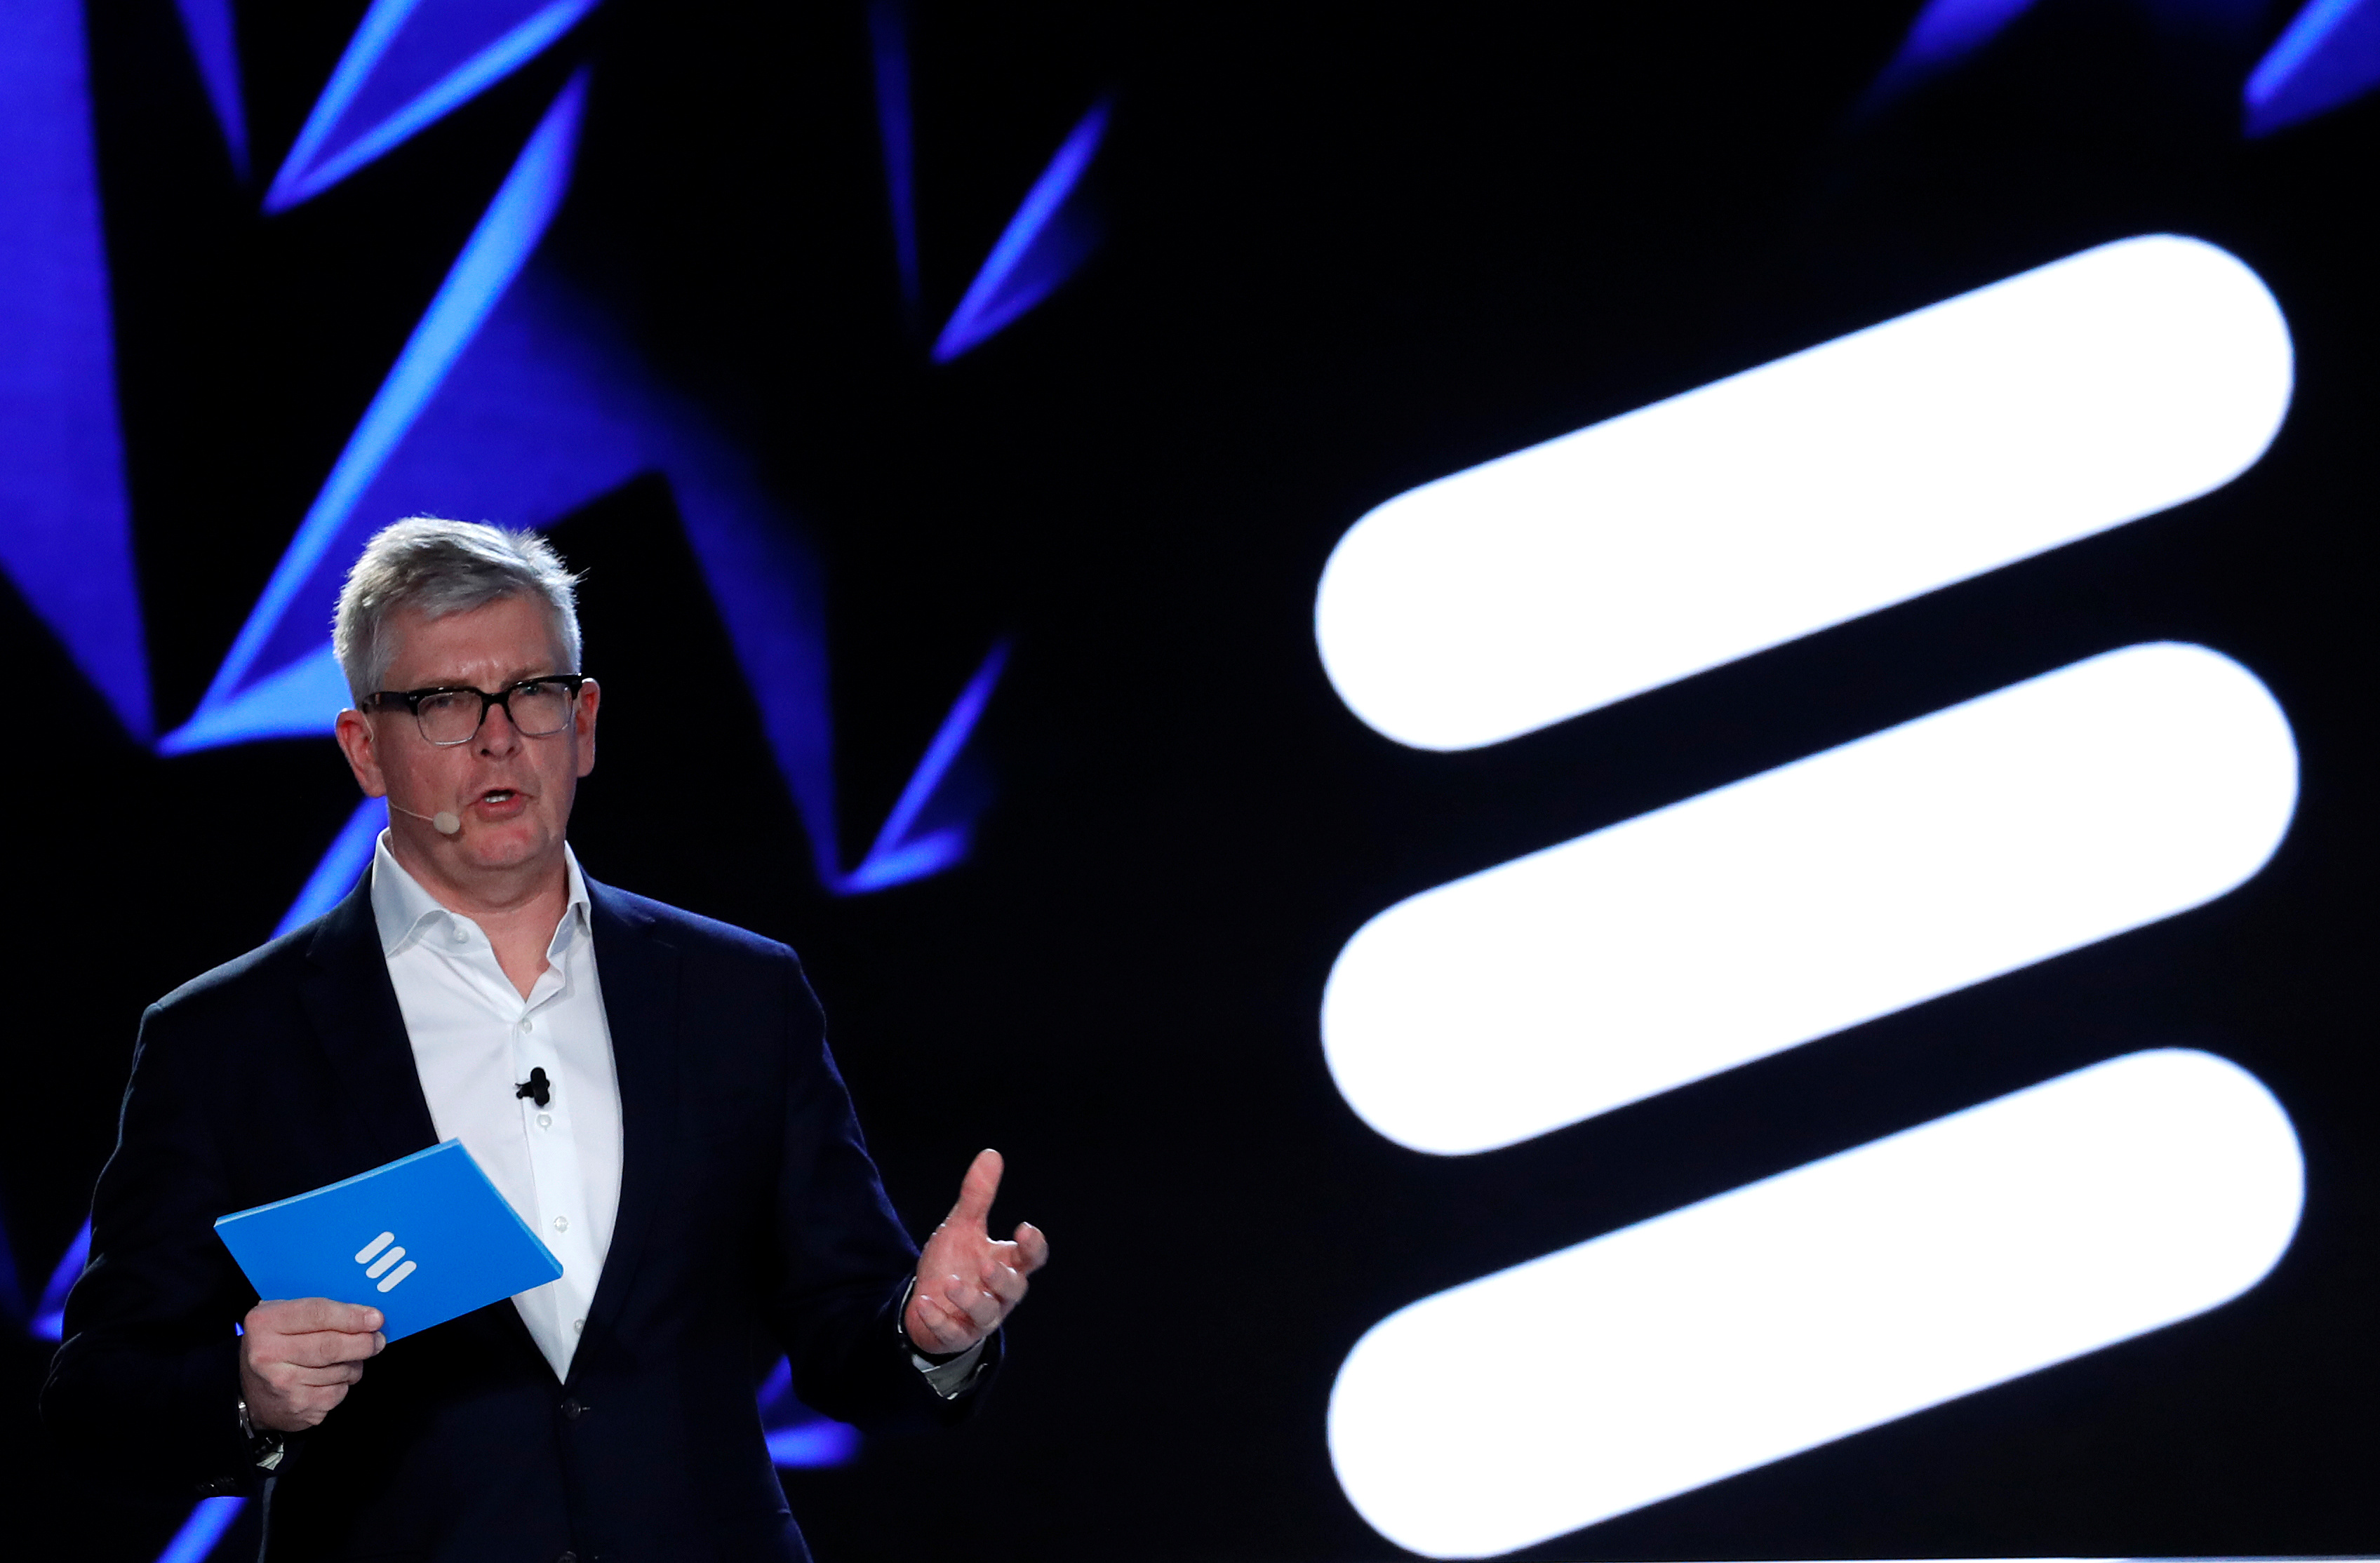 Ericsson Chief Executive Officer Borje Ekholm holds a news conference during the Mobile World Congress in Barcelona